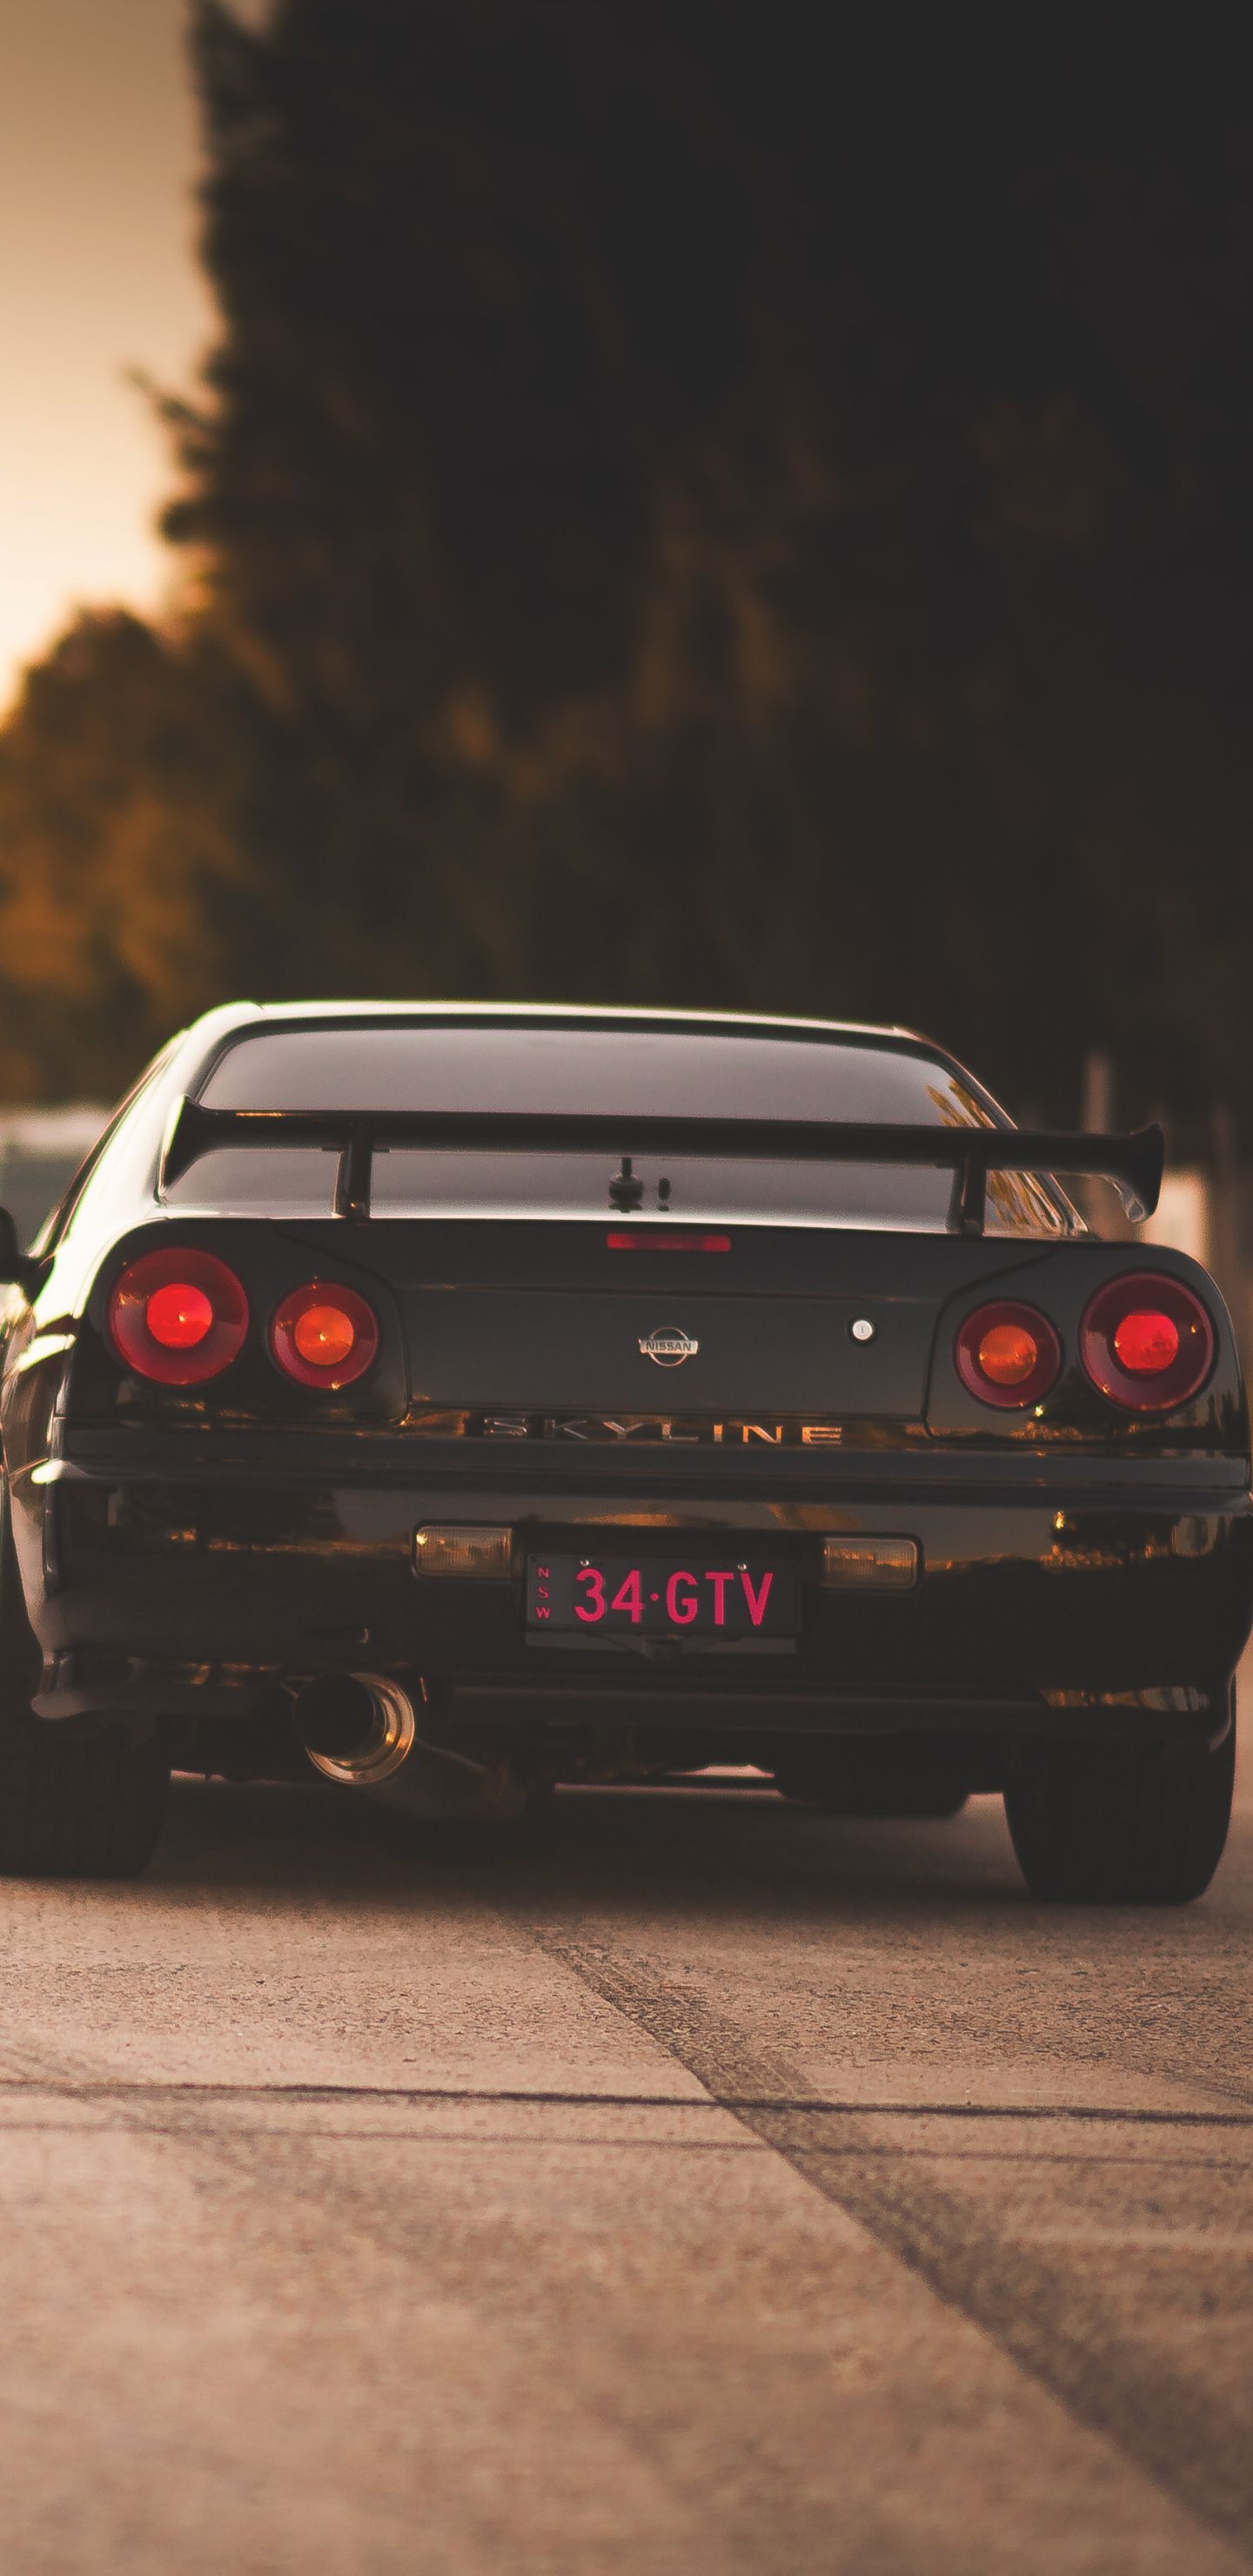 Nissan Skyline R34, Phone wallpapers, Mobile backgrounds, HD quality, 1440x2960 HD Handy